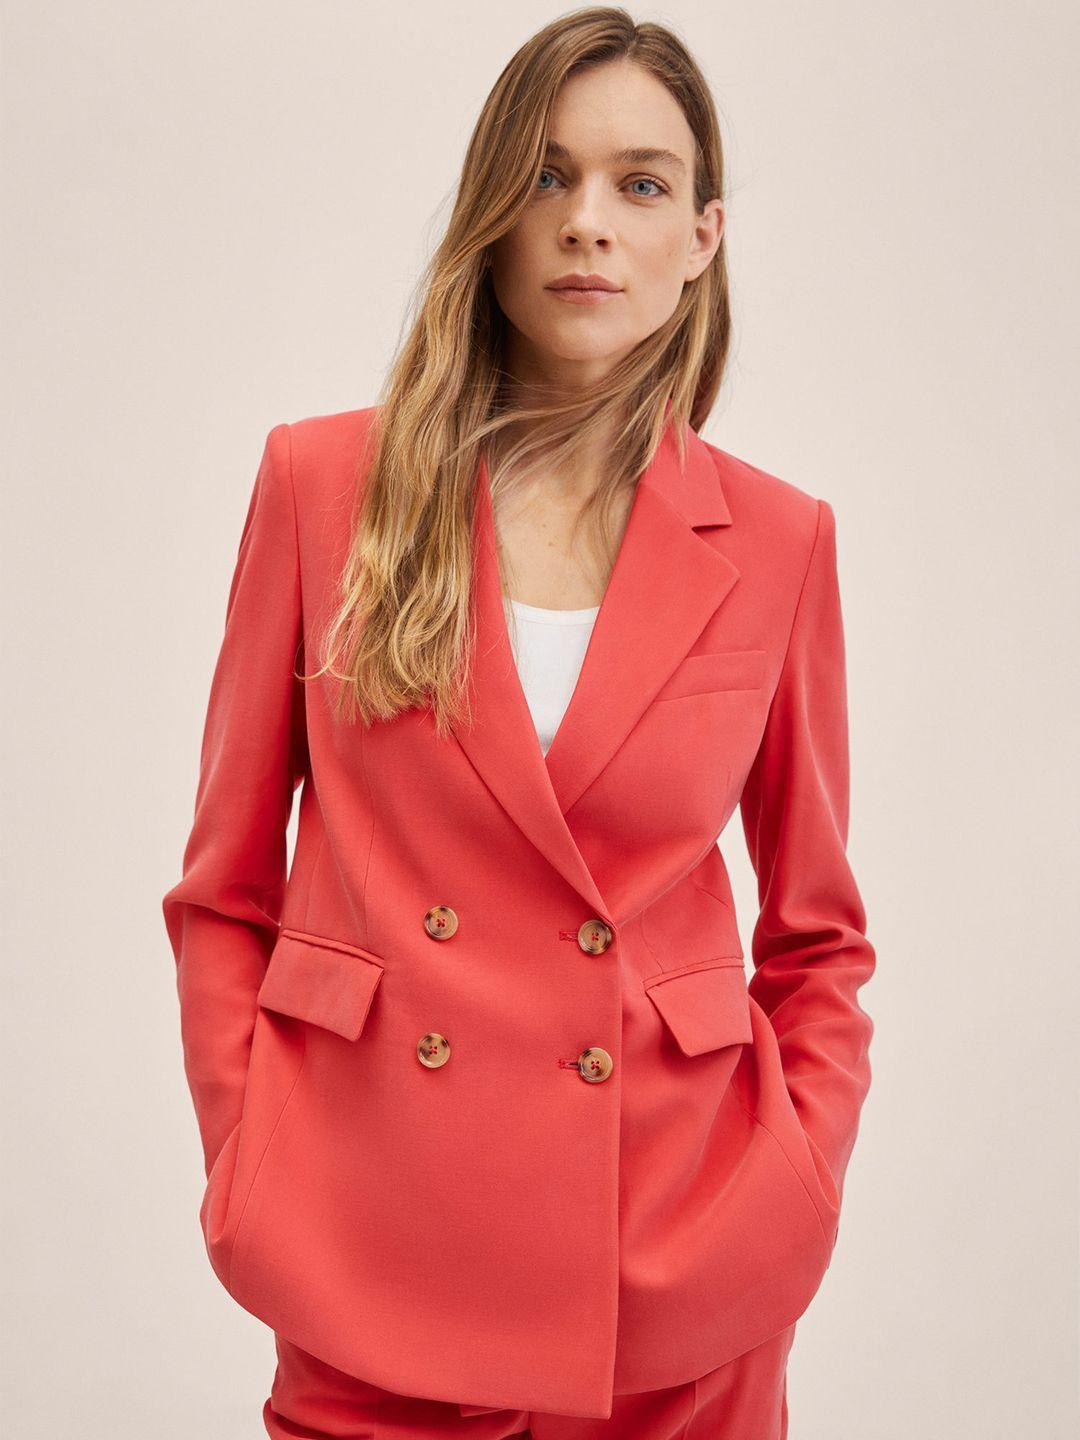 MANGO Women Coral Red Solid Double-Breasted Blazer